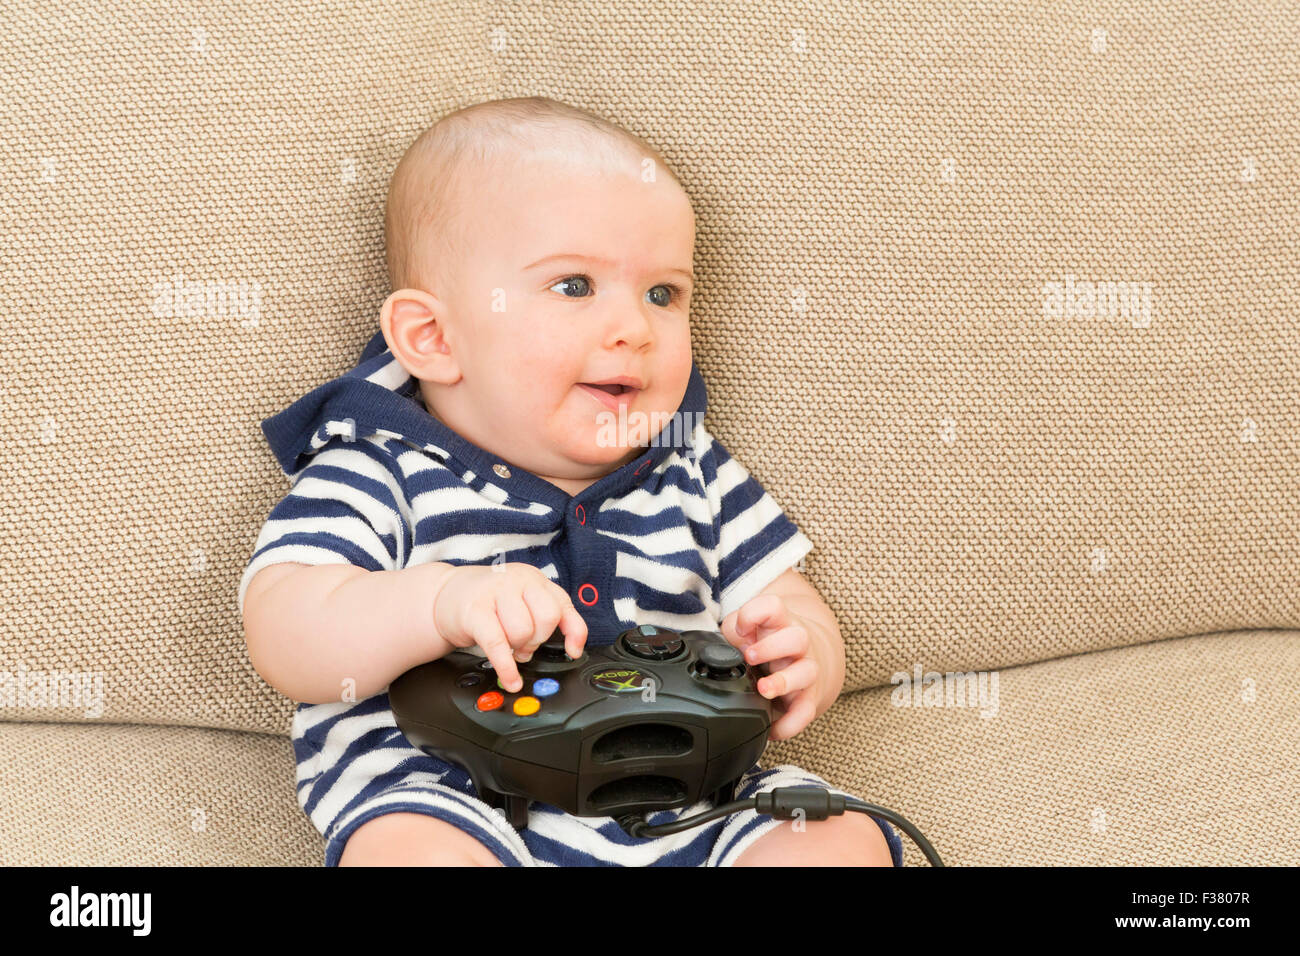 baby playing computer game Stock Photo